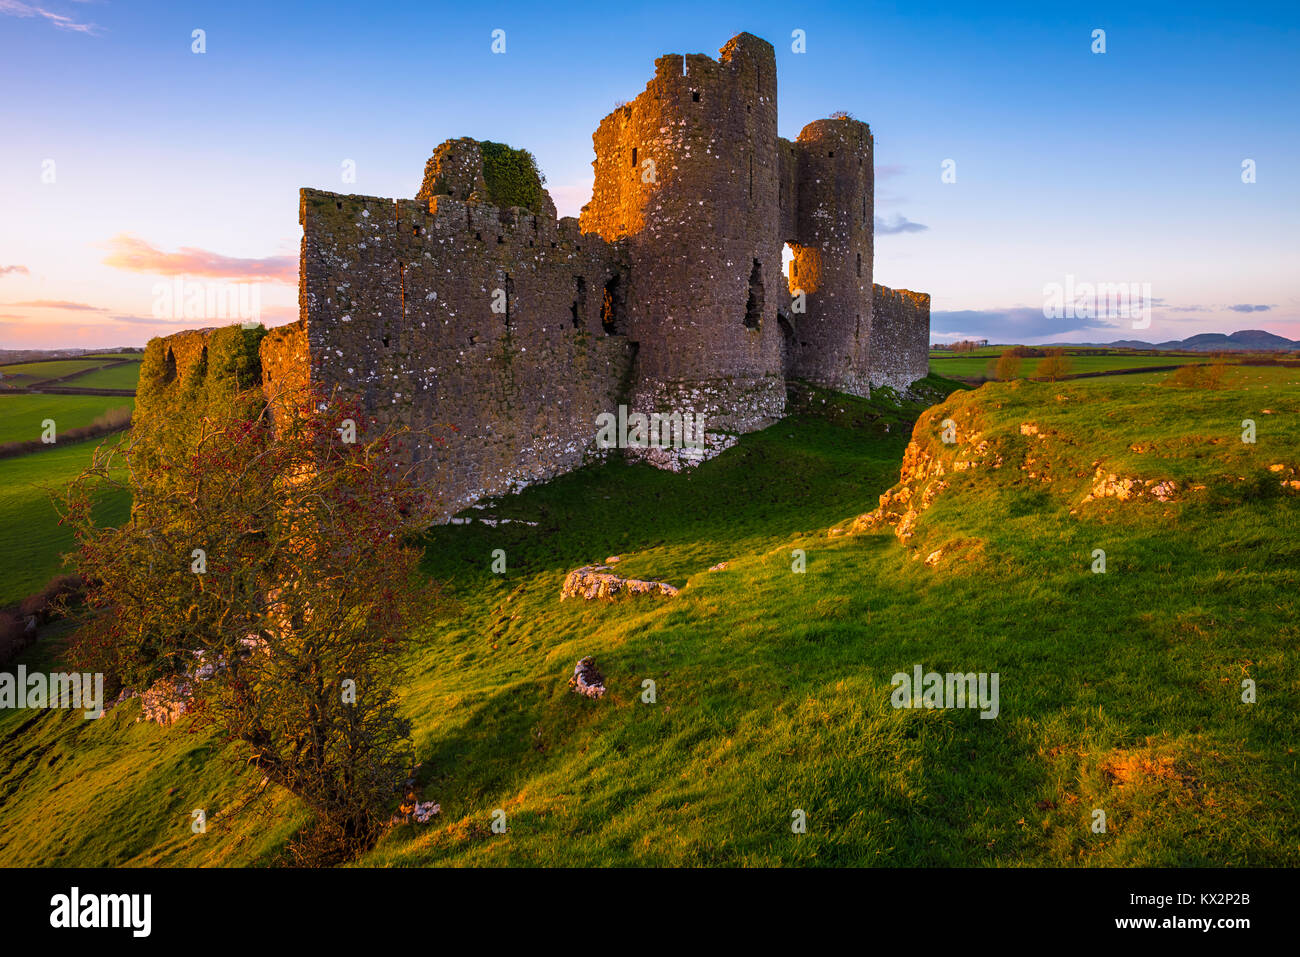 Ruins of Castle Roche, County Louth in Ireland Stock Photo